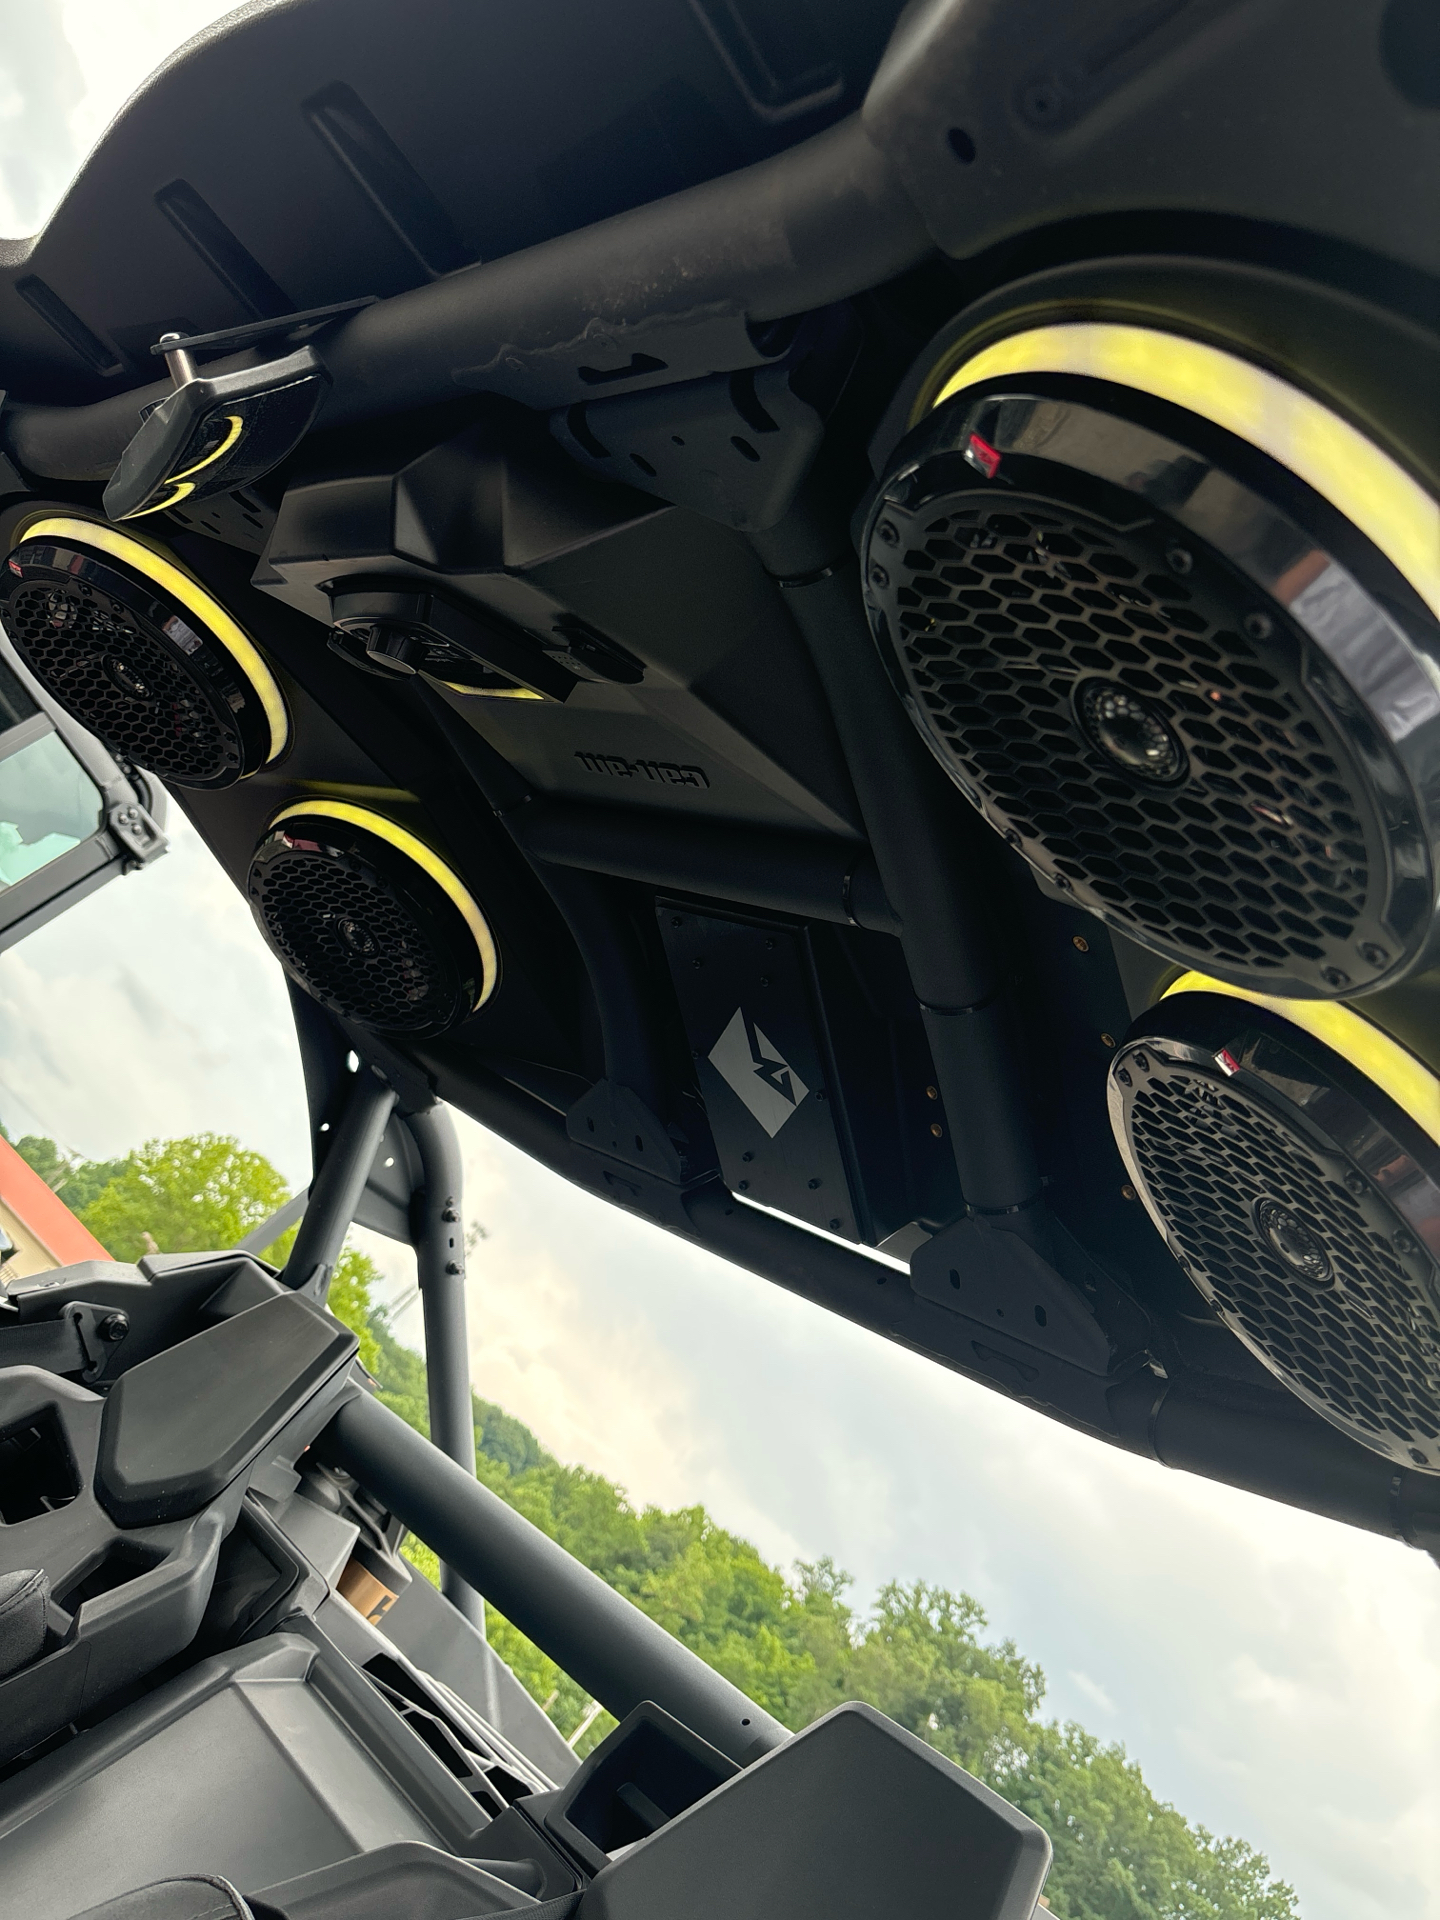 2024 Can-Am Maverick X3 RS Turbo in Barboursville, West Virginia - Photo 7